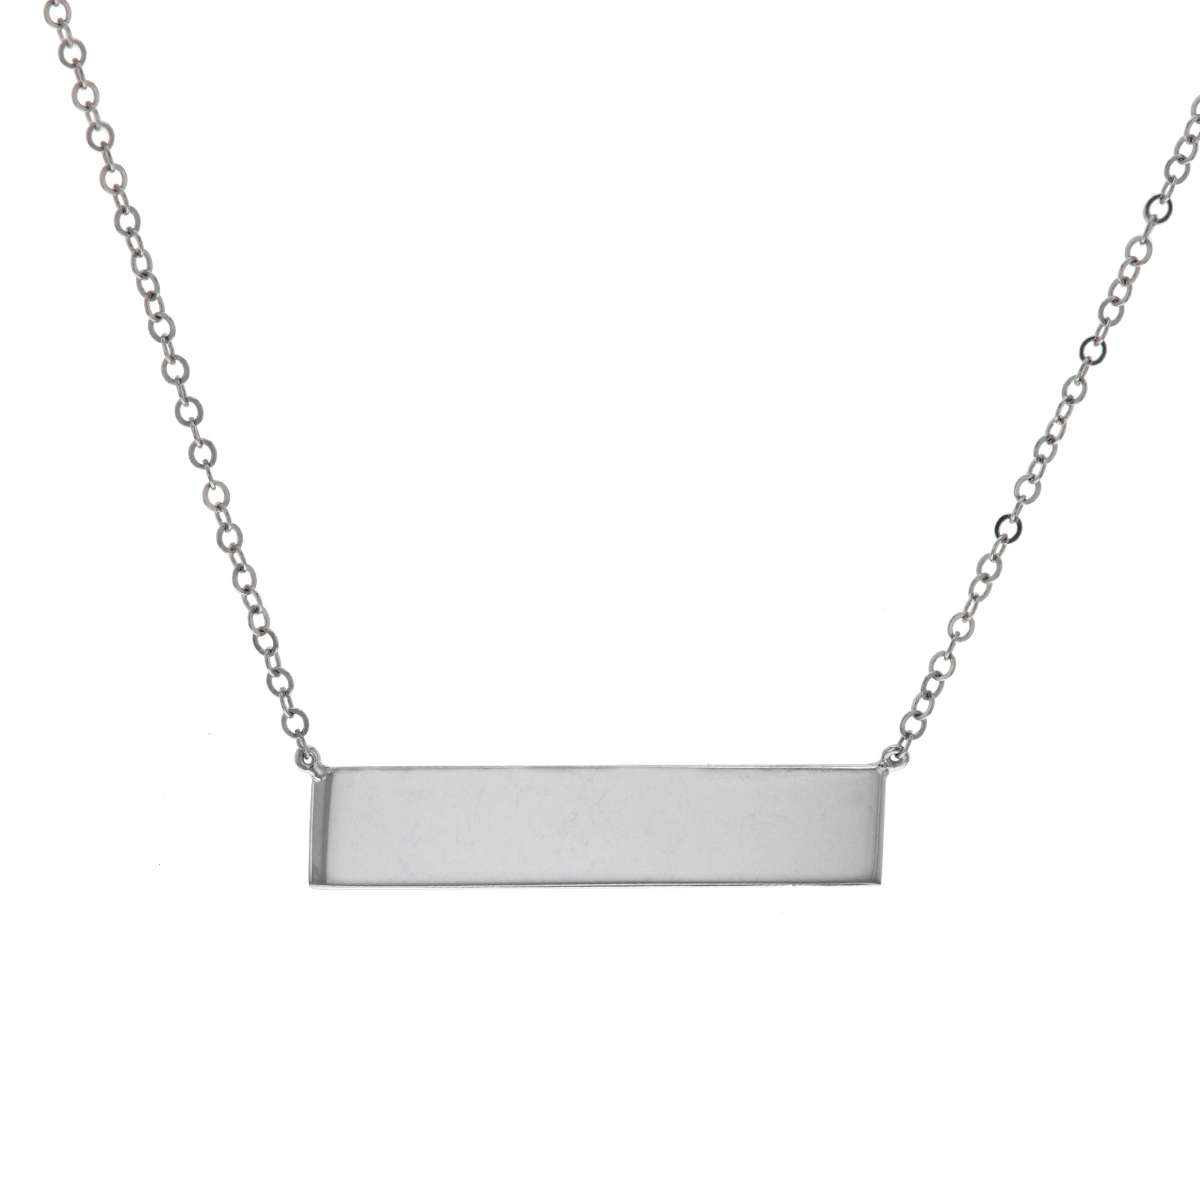 Valentine's Day: The Perfect Gift engravable necklace